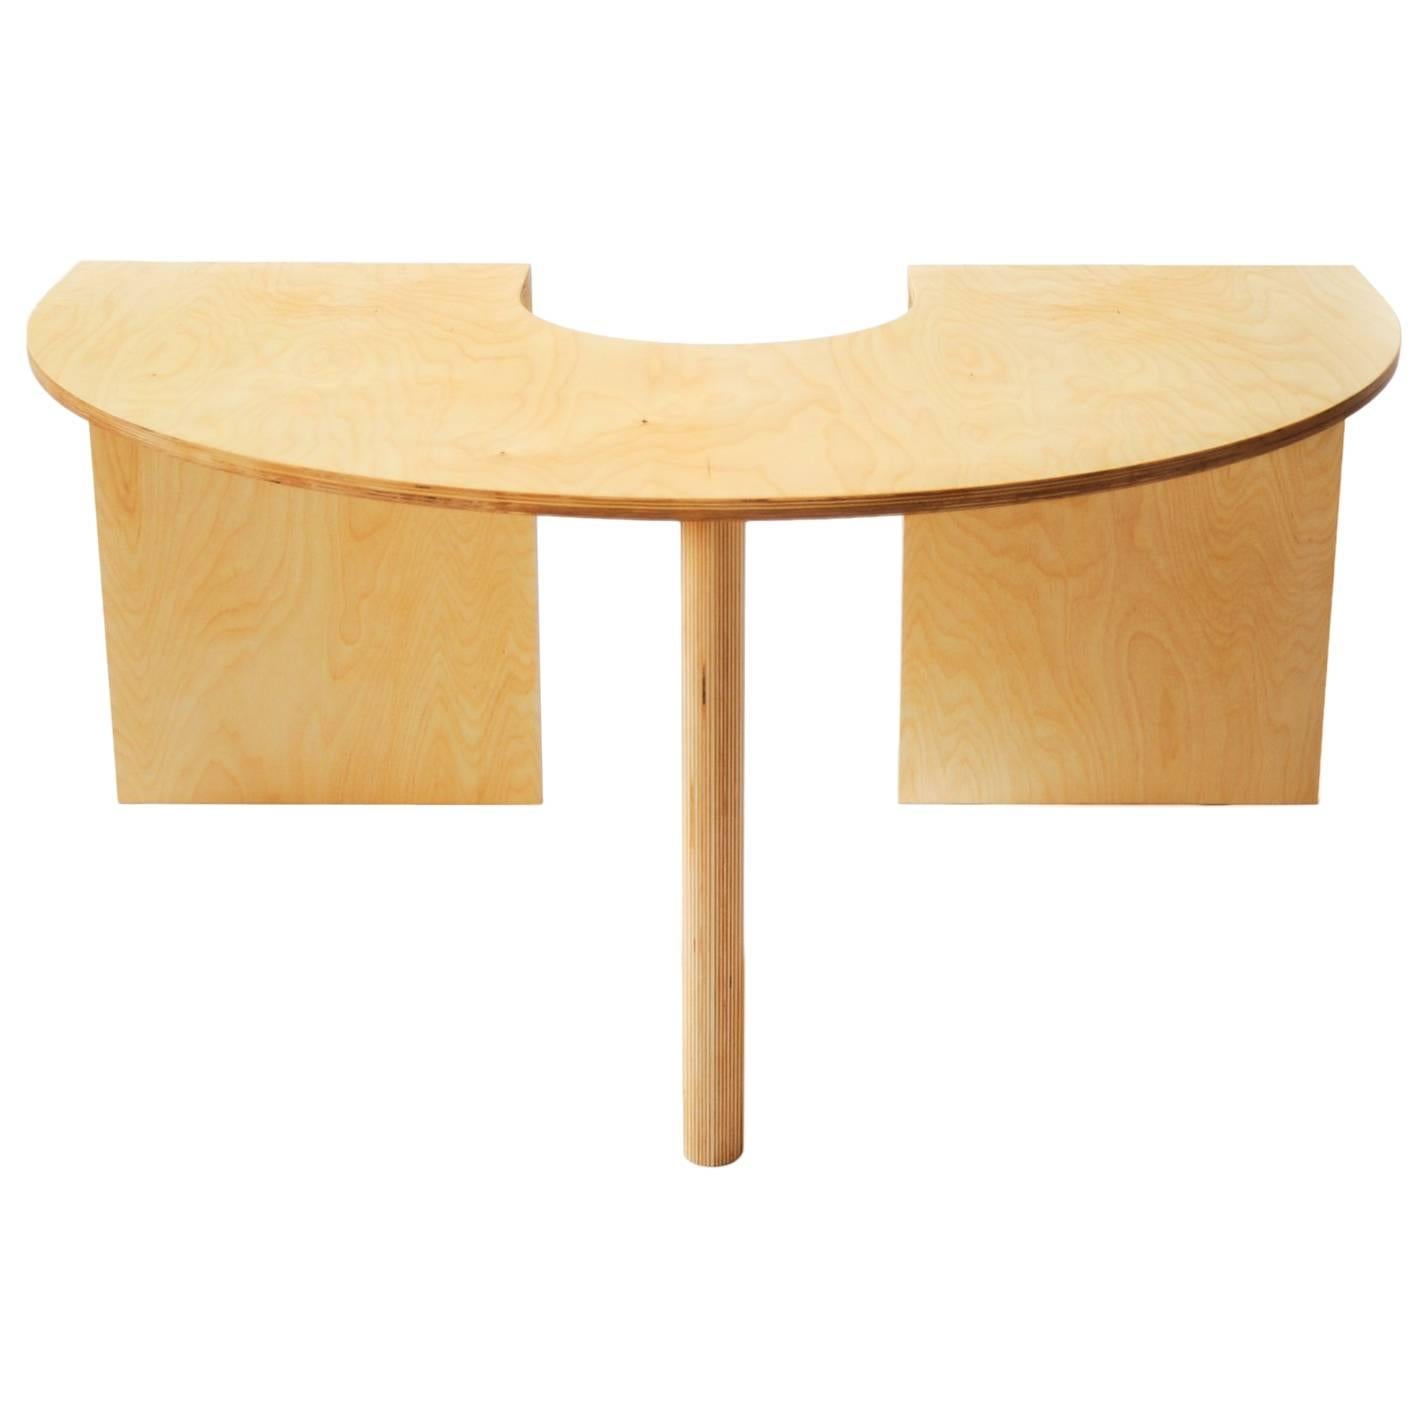 Lunar Table by Kinder Modern in Birch Plywood, USA, 2017 For Sale